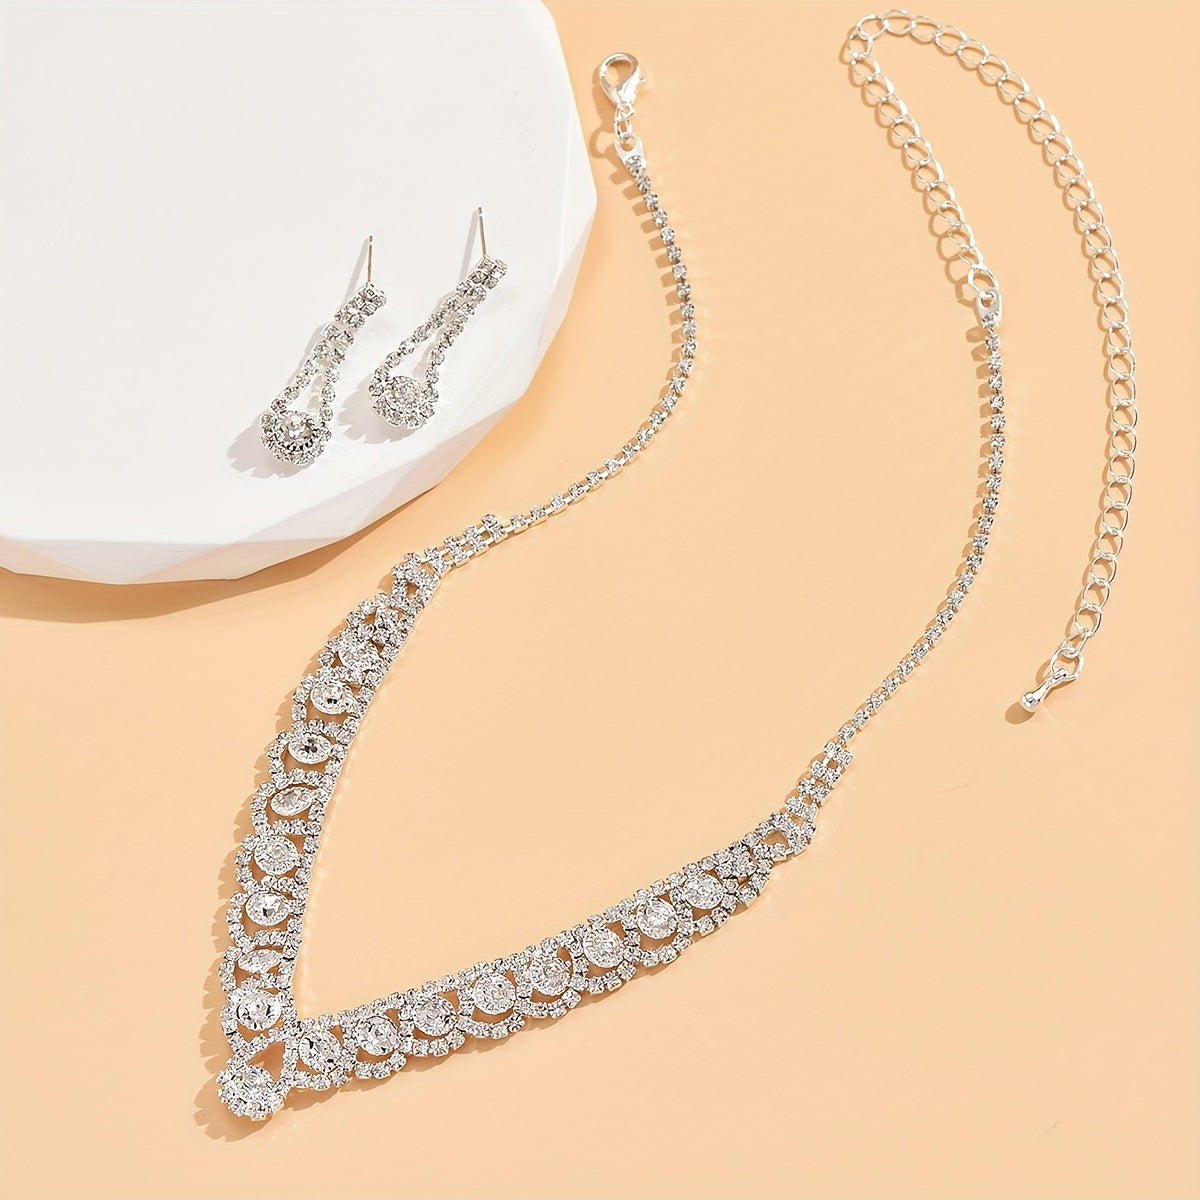 Elegant Rhinestone V-Shaped Necklace and Earrings Set - Perfect for Parties and Special Occasions